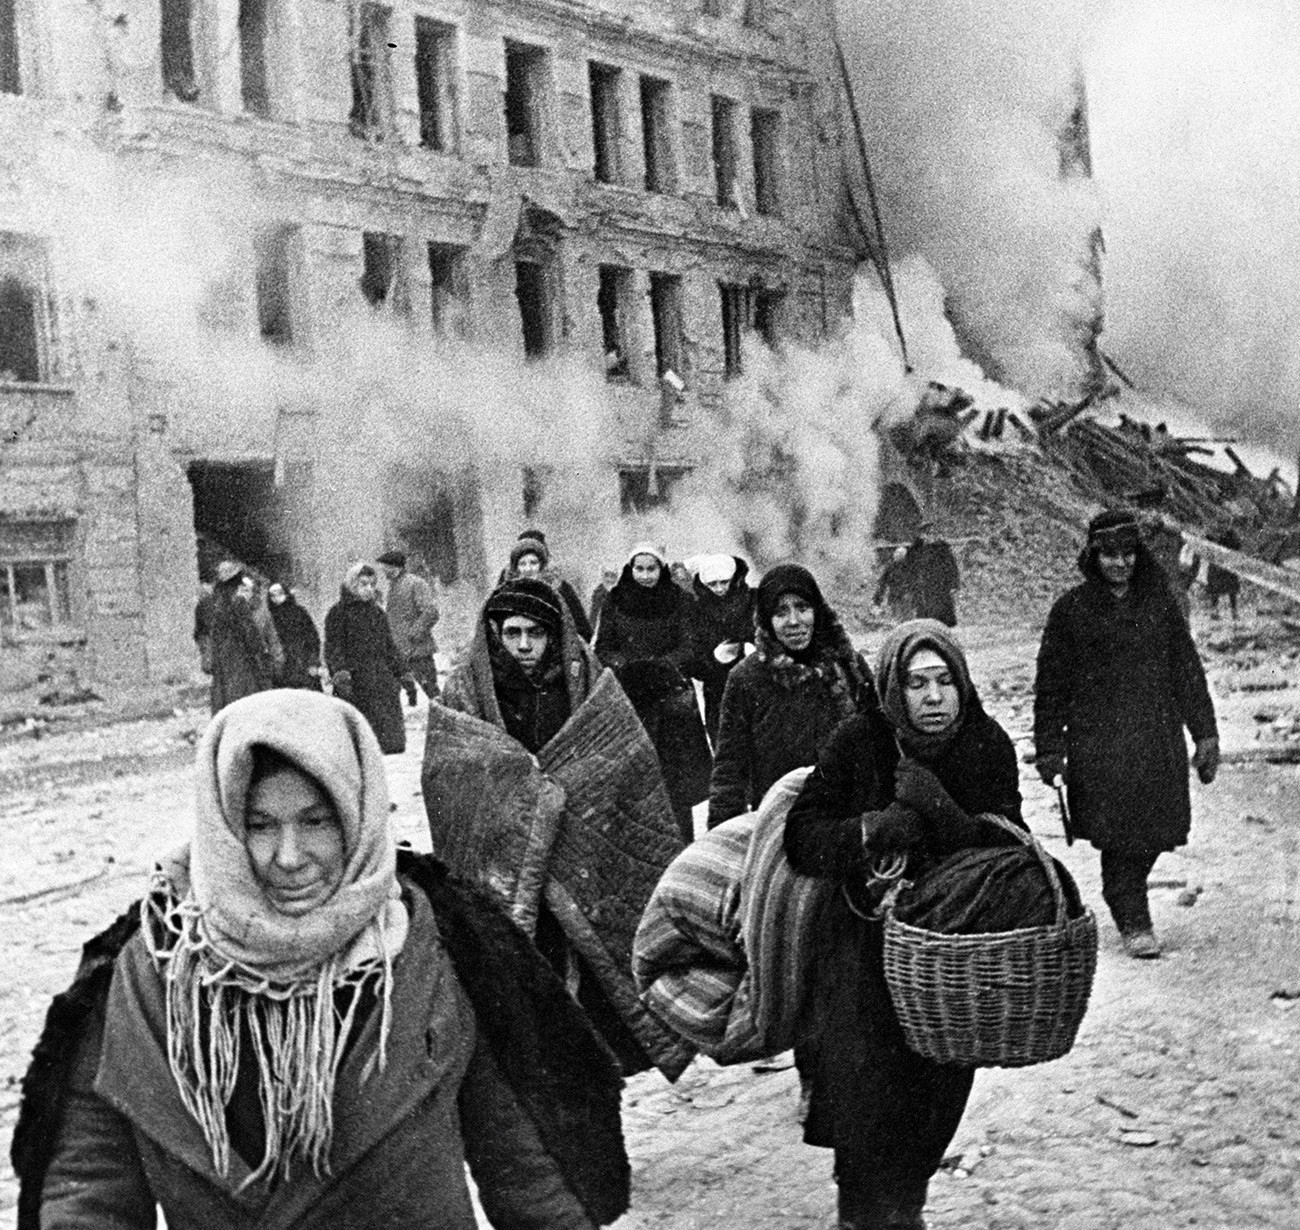 Citizens of Leningrad during the siege of the city (1941 - 1943)